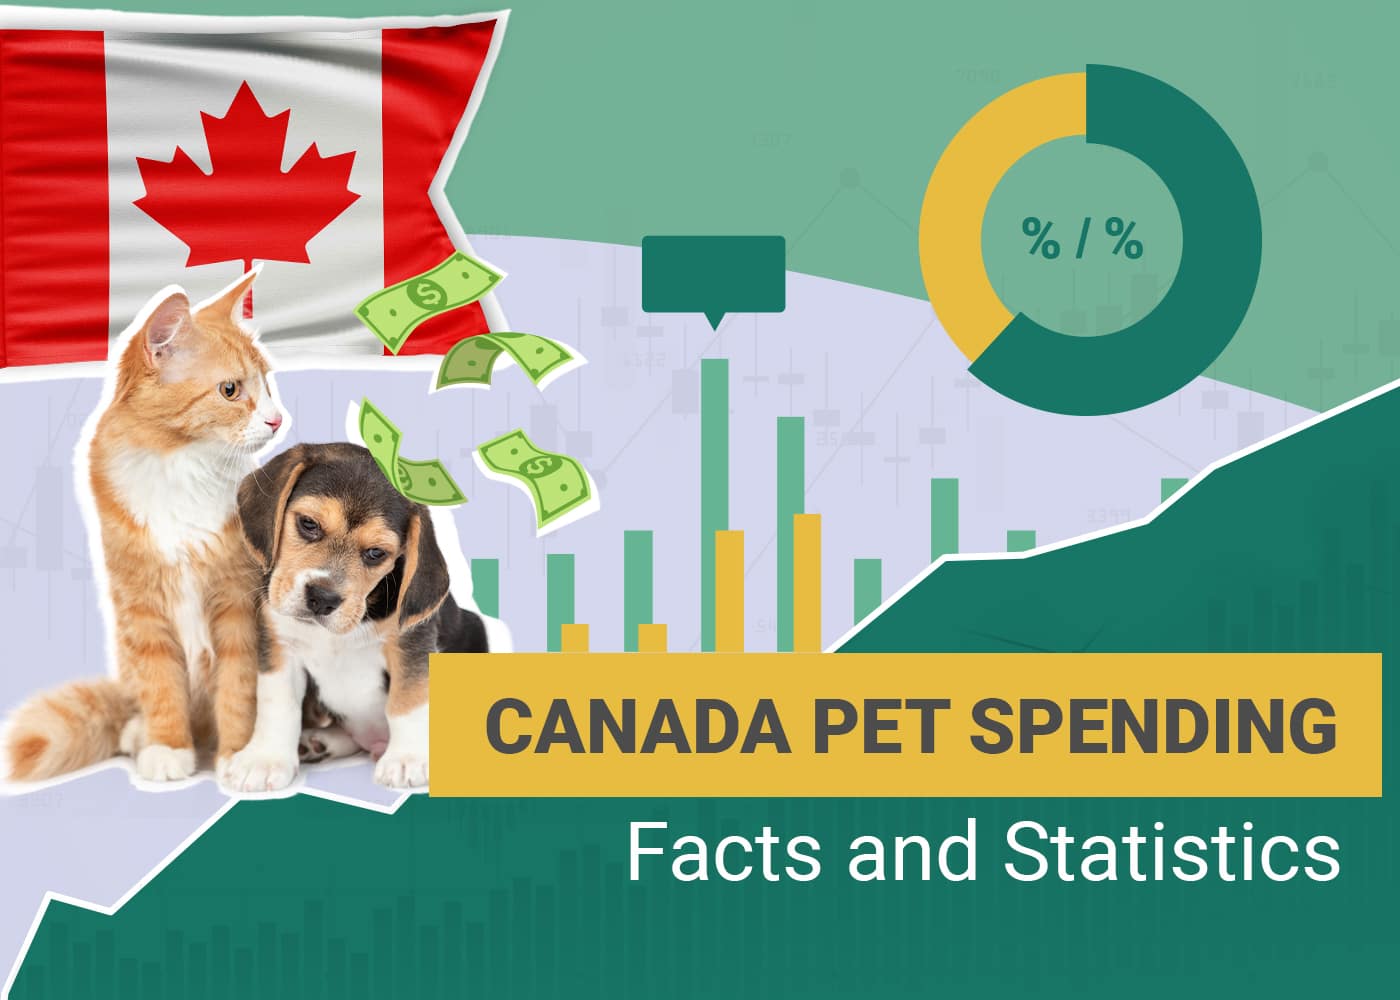 Canada Pet Spending Facts and Statistics